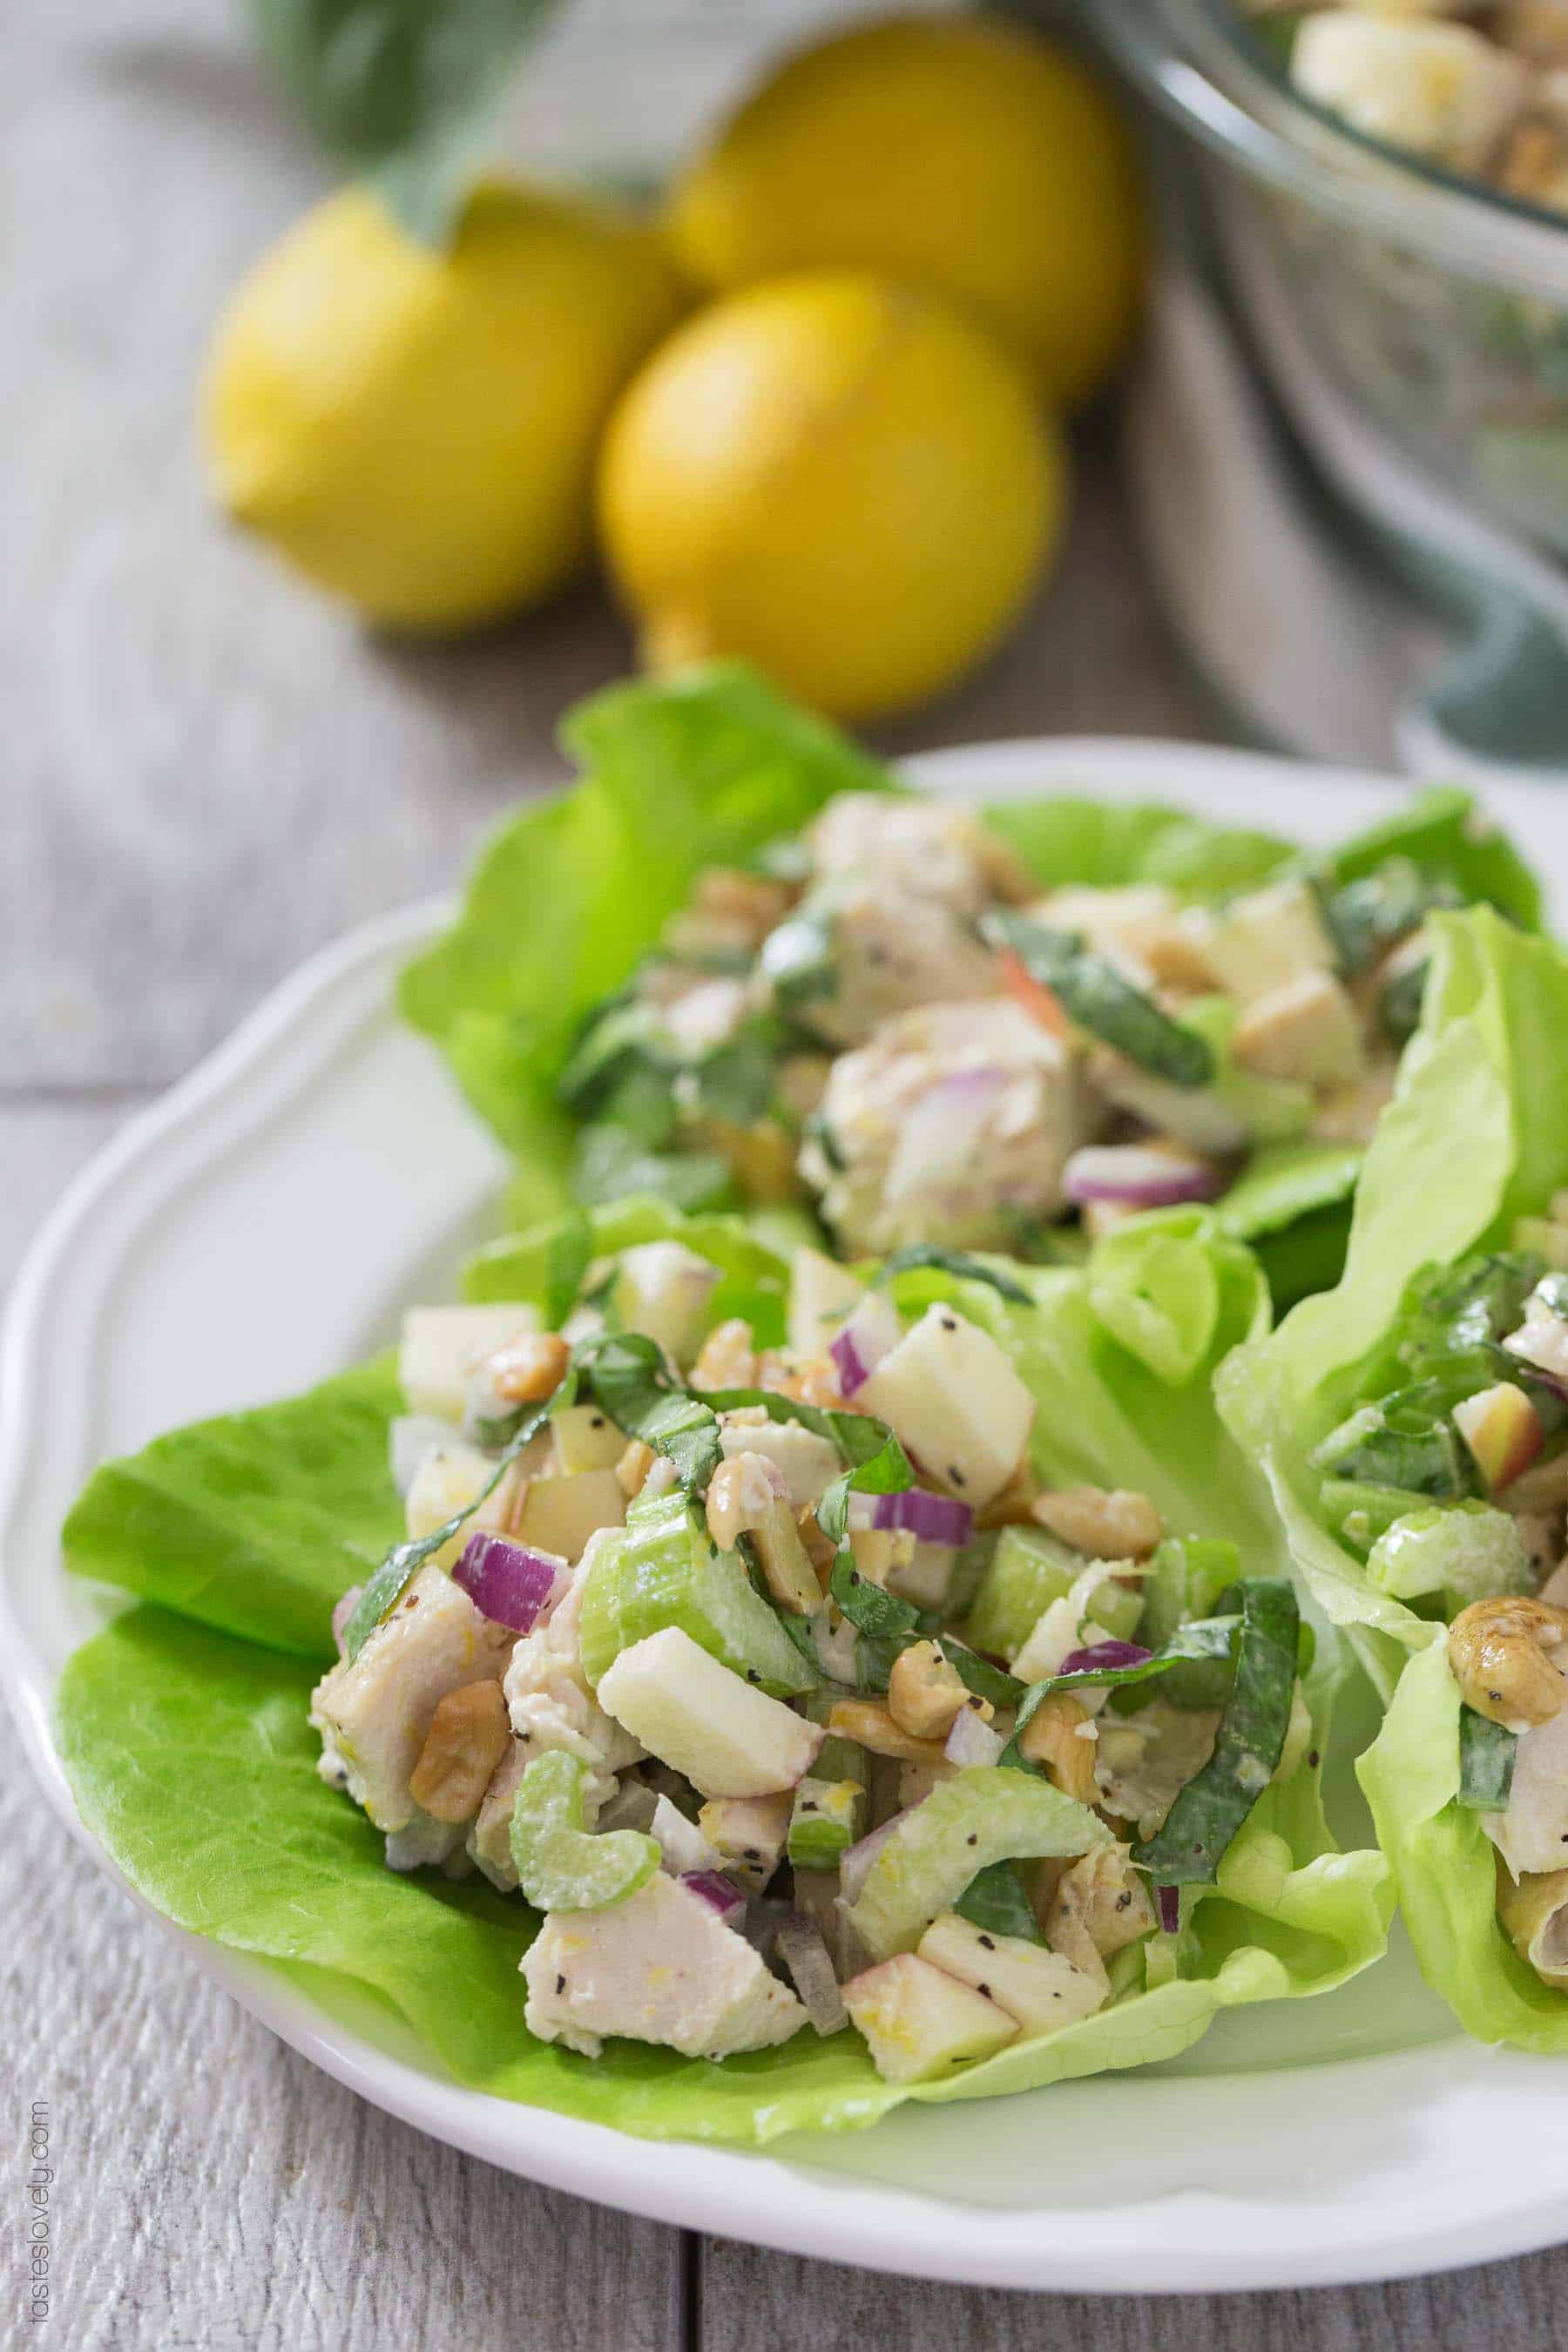 Paleo Lemon Basil Chicken Salad Lettuce Wraps - a light and healthy lunch recipe that is gluten free, whole30, paleo and dairy free!